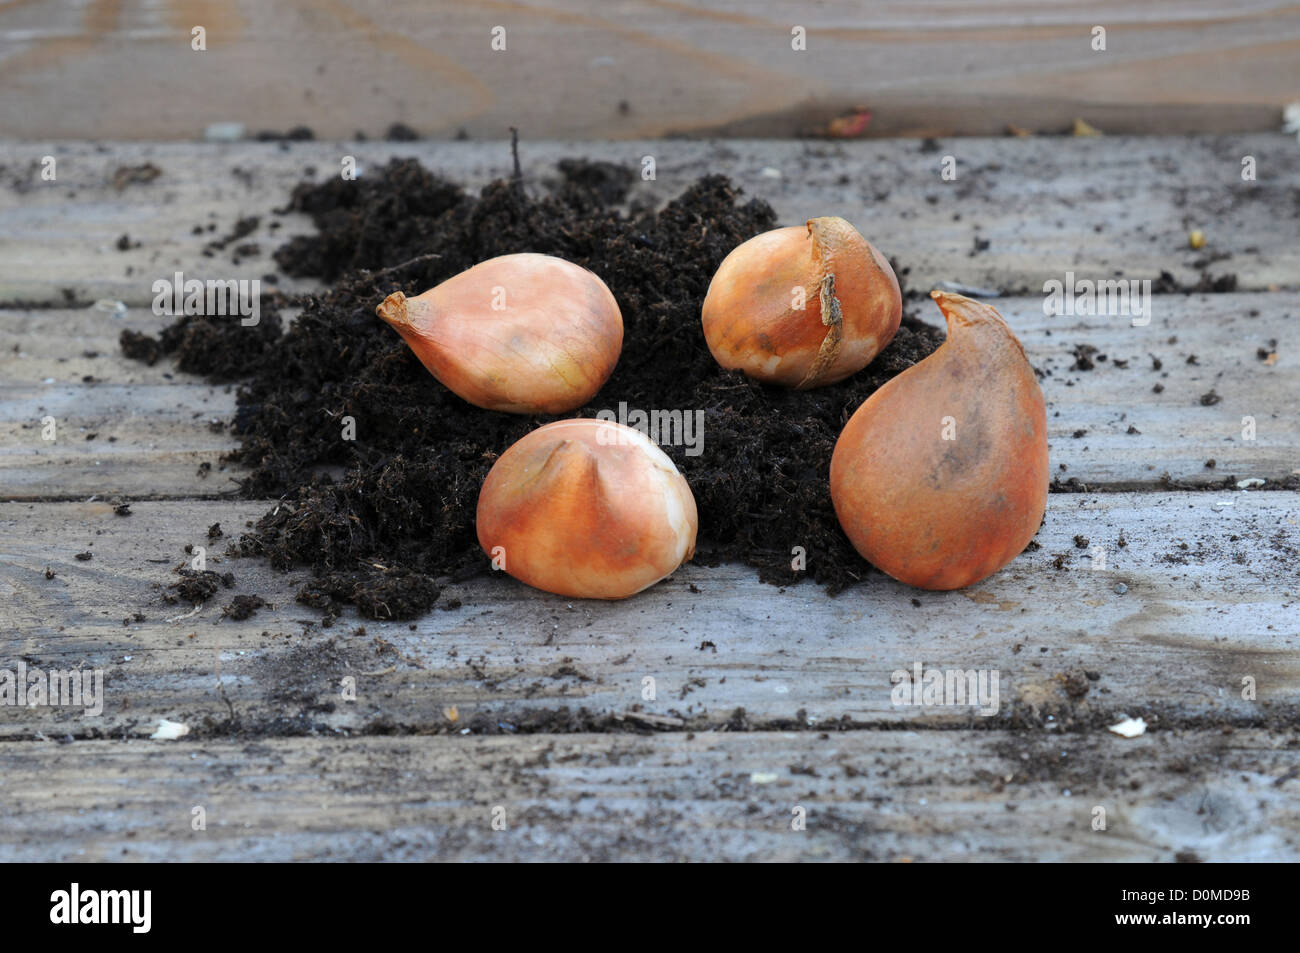 Tulip bulbs on workbench prior to planting Stock Photo